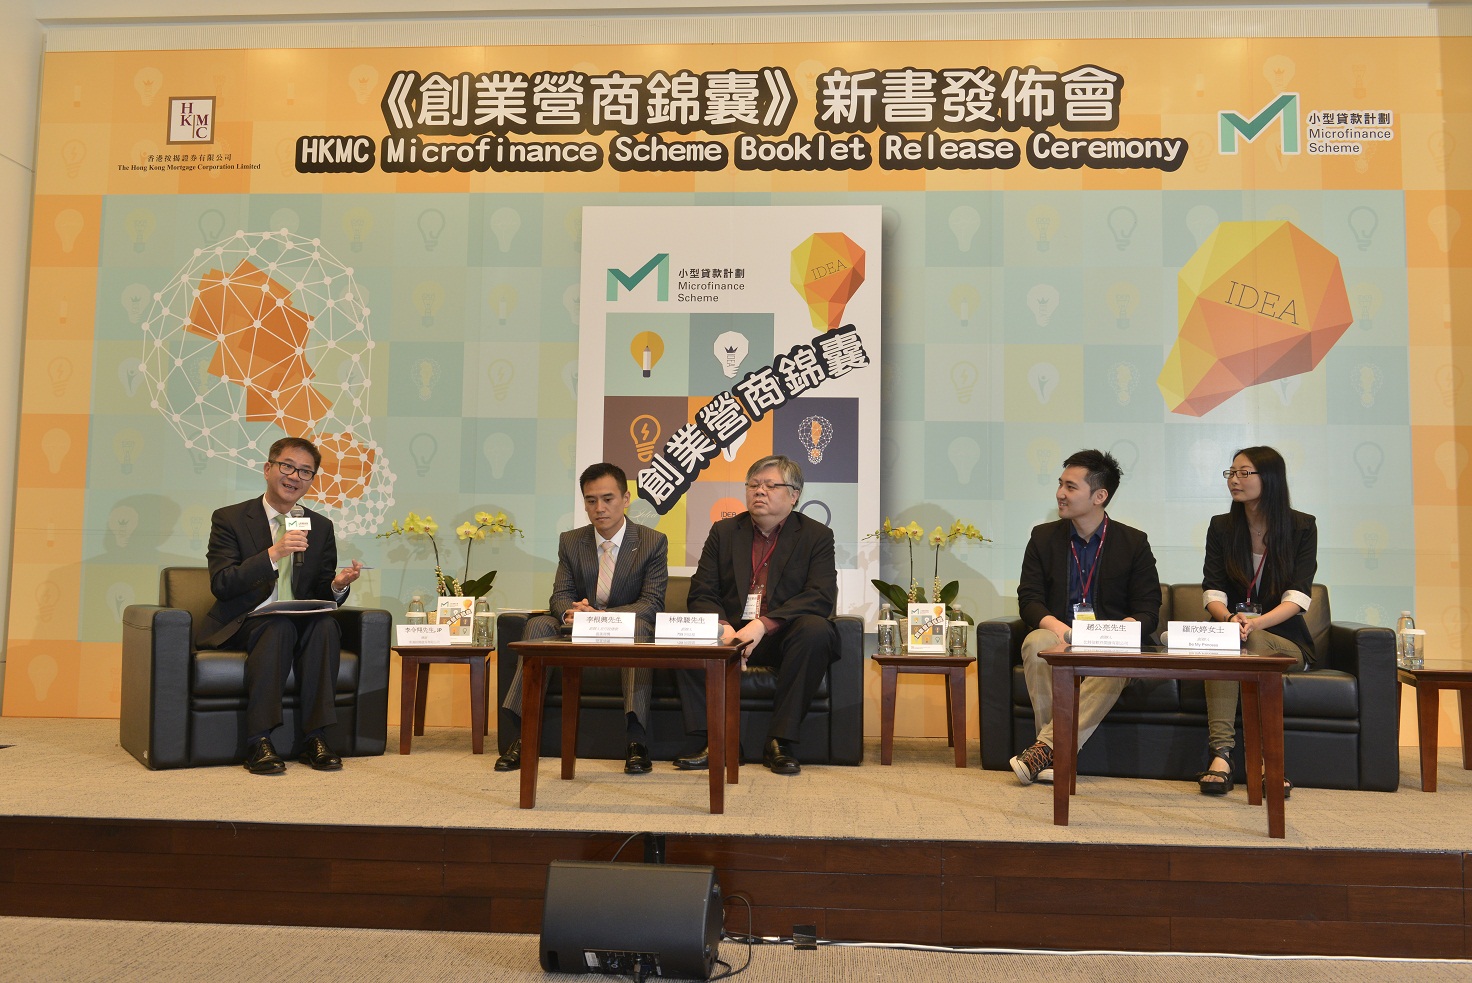 A panel discussion entitled “Sharing of business start-up experience” is arranged with four panel speakers.  Mr Raymond Li, the Chief Executive Officer of the HKMC, is the facilitator of the panel discussion.